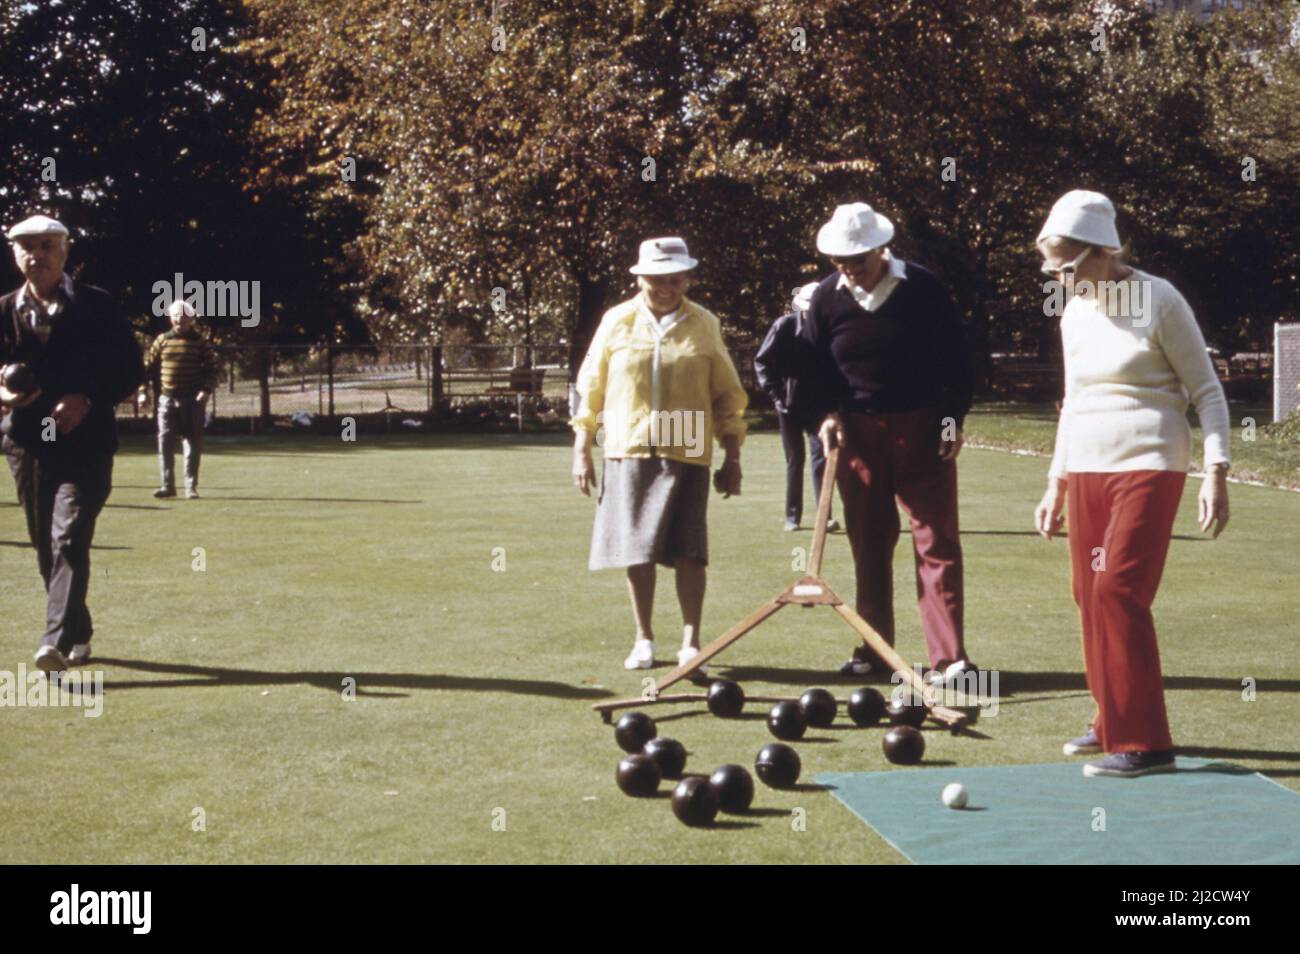 Members of the Bowling Green Bowling Club meet for a game in Central Park  ca.  1973 Stock Photo